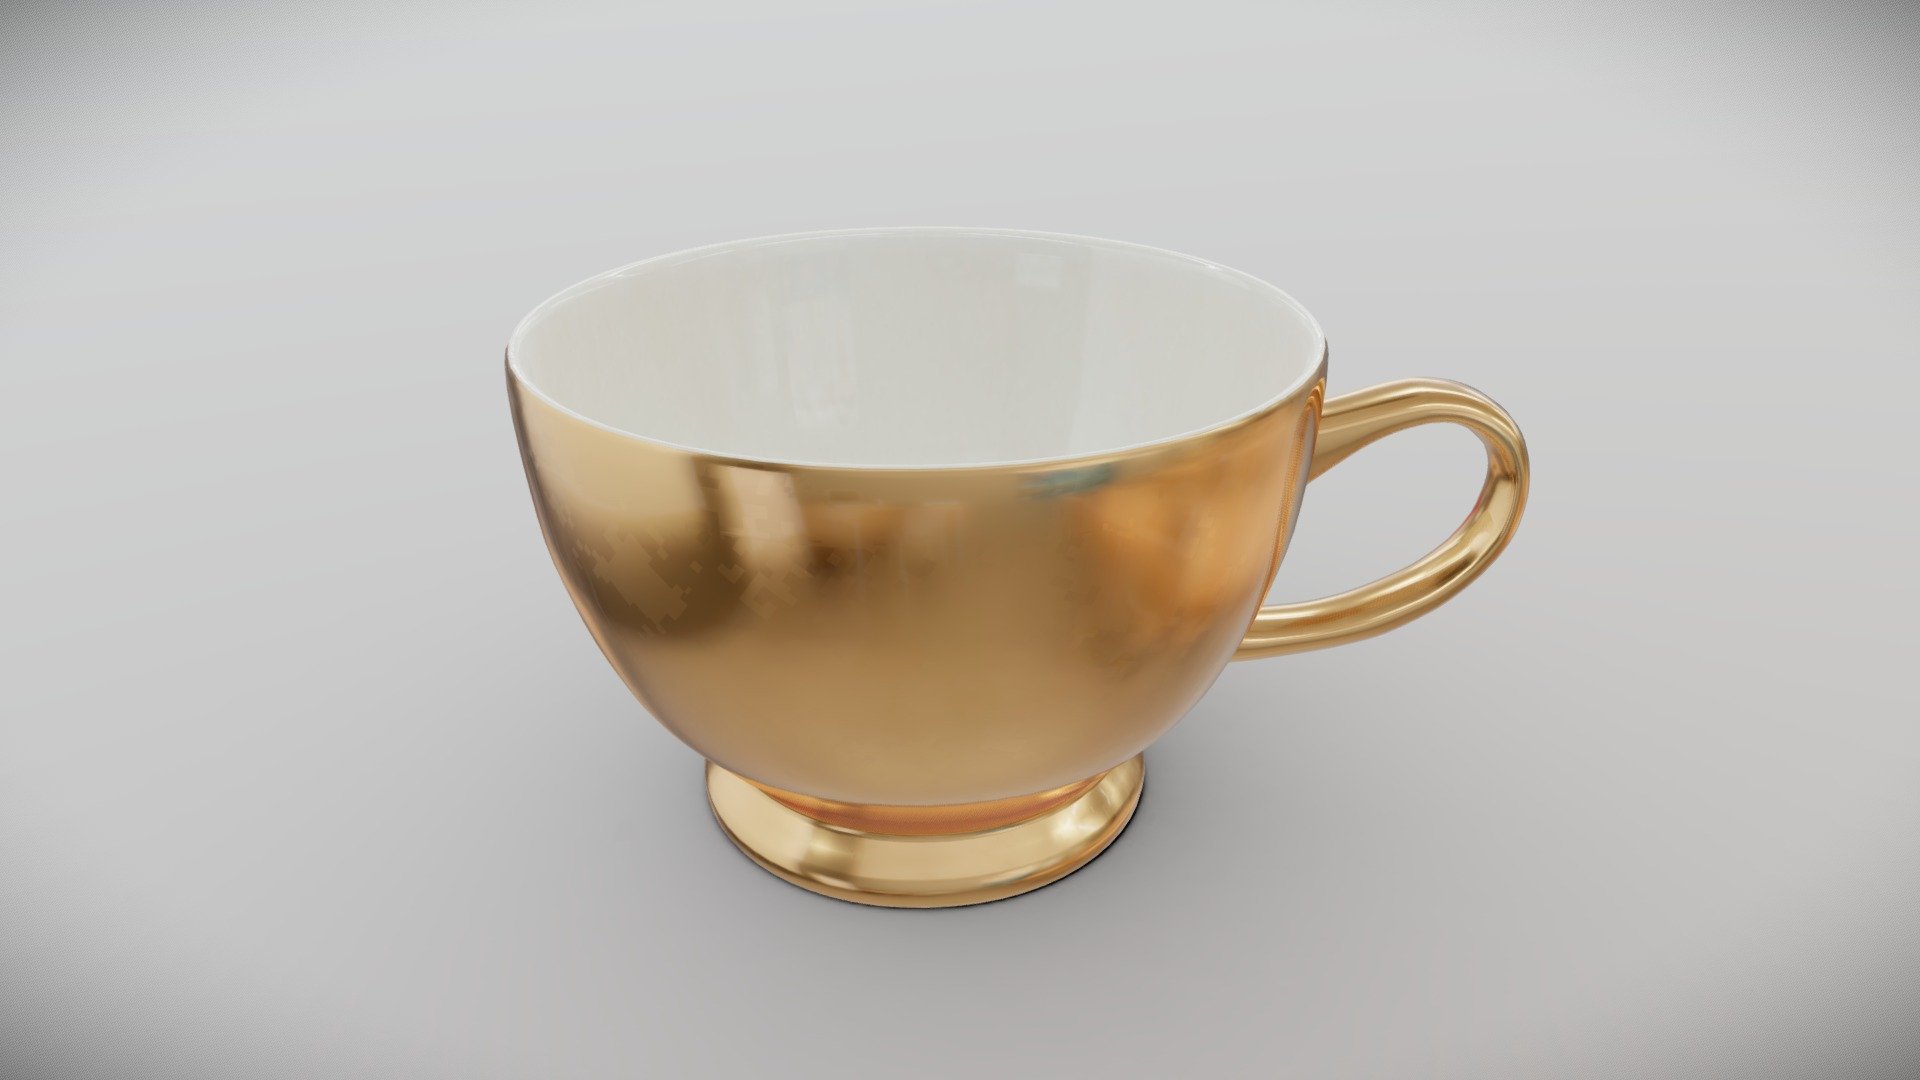 A high gloss gold luster base porcelain teacup in the Golden pattern.

Formats: OBJ | MTL

Textures: PNG | 2048 x 2048

UVW Mapped: Non-overlapping

Materials: 1 Material

Subdivision-ready: Yes

Model - OBJ | Textures - Substance Painter - Gold Teacup - 3D model by Render Island (@LRRender.Island) 3d model